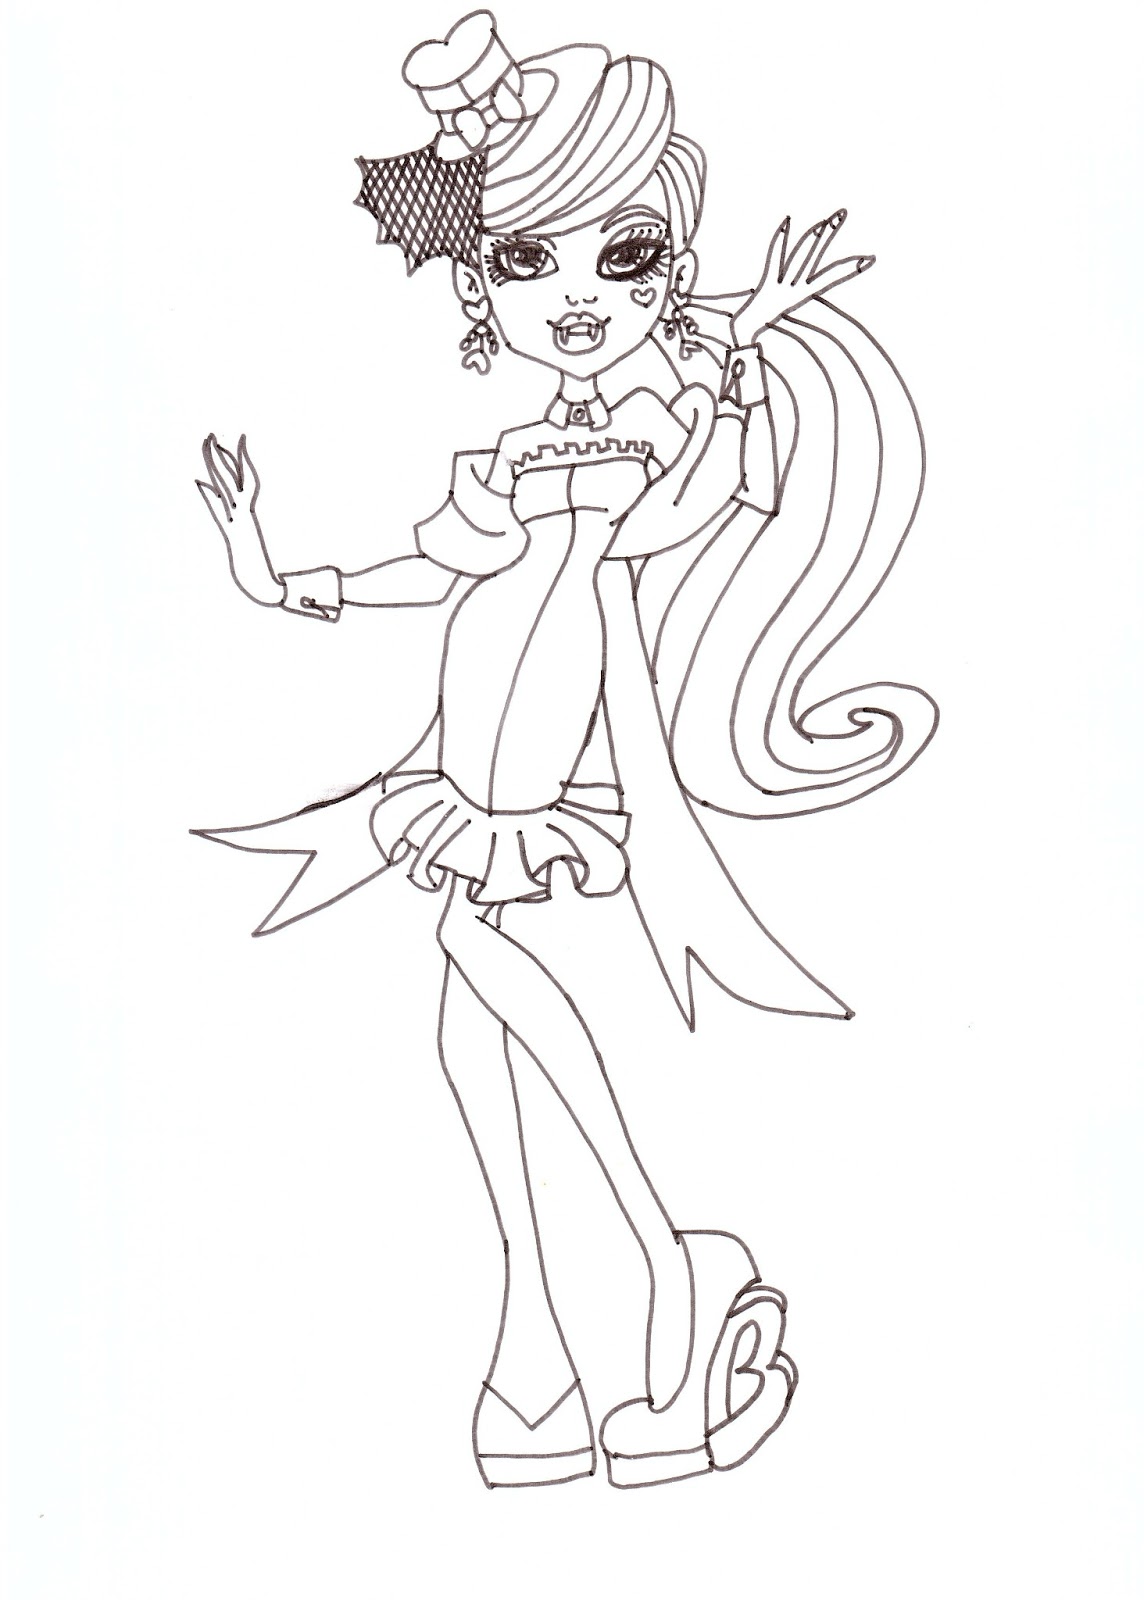 Draculaura Dawn of the Dance Coloring Sheet CLICK HERE TO PRINT Free printable Monster High